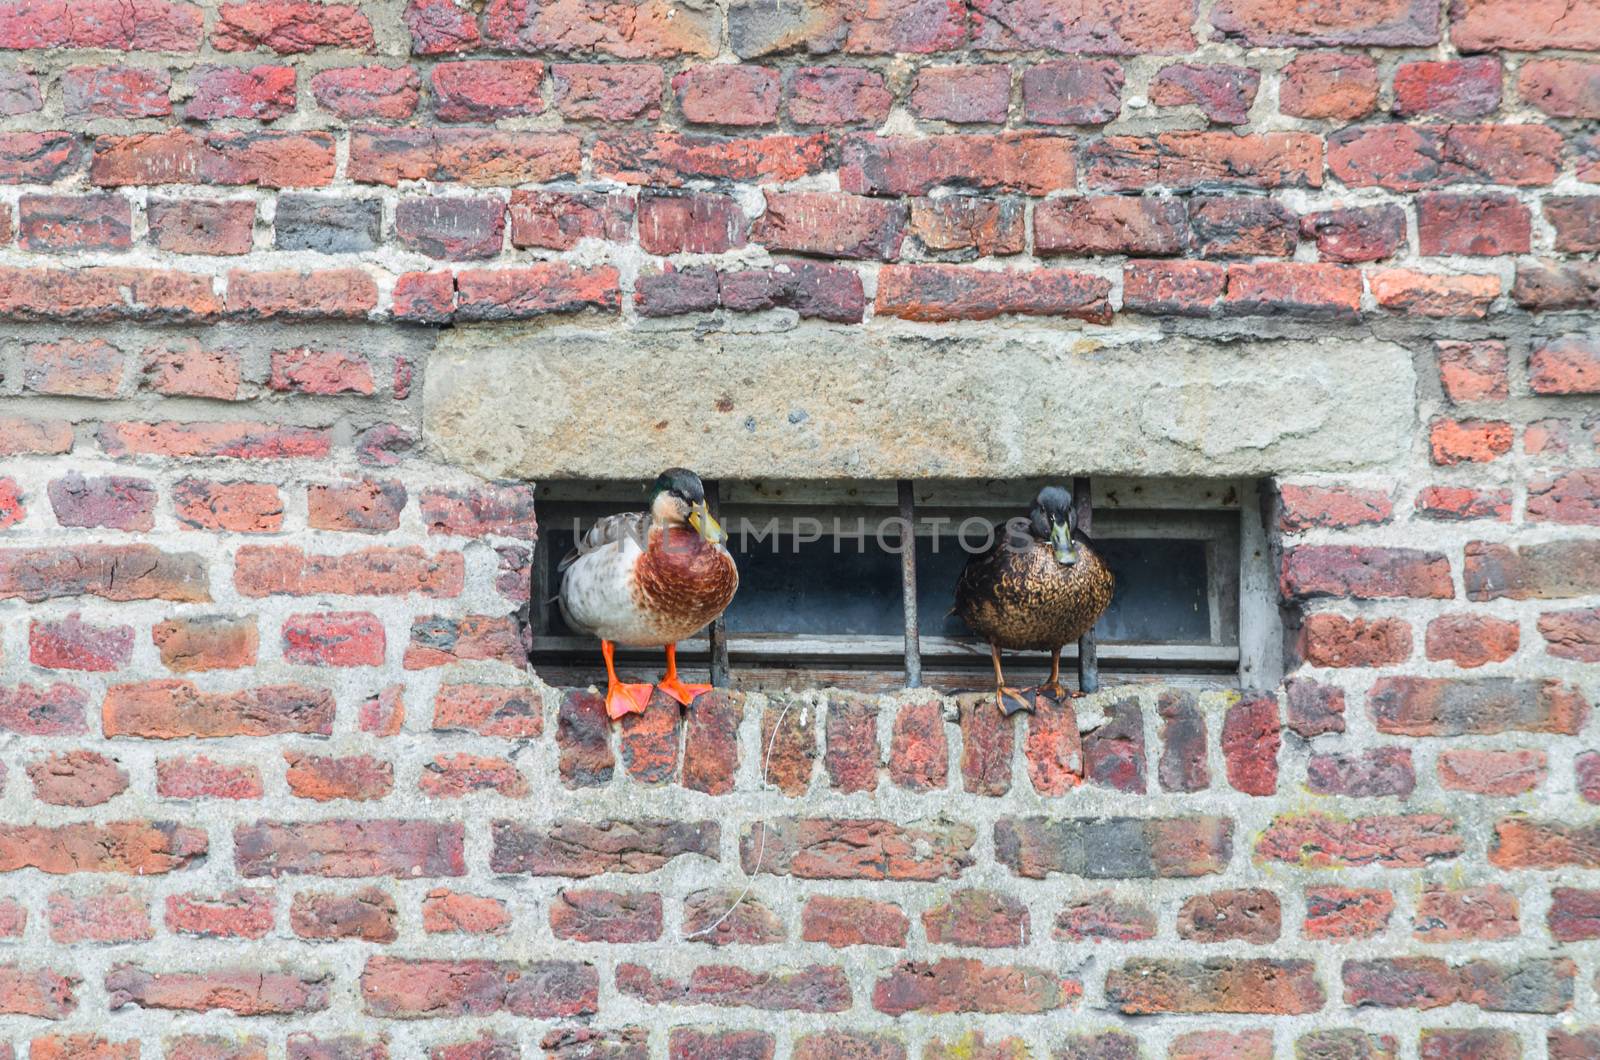 Ducks on a projecting wall by JFsPic